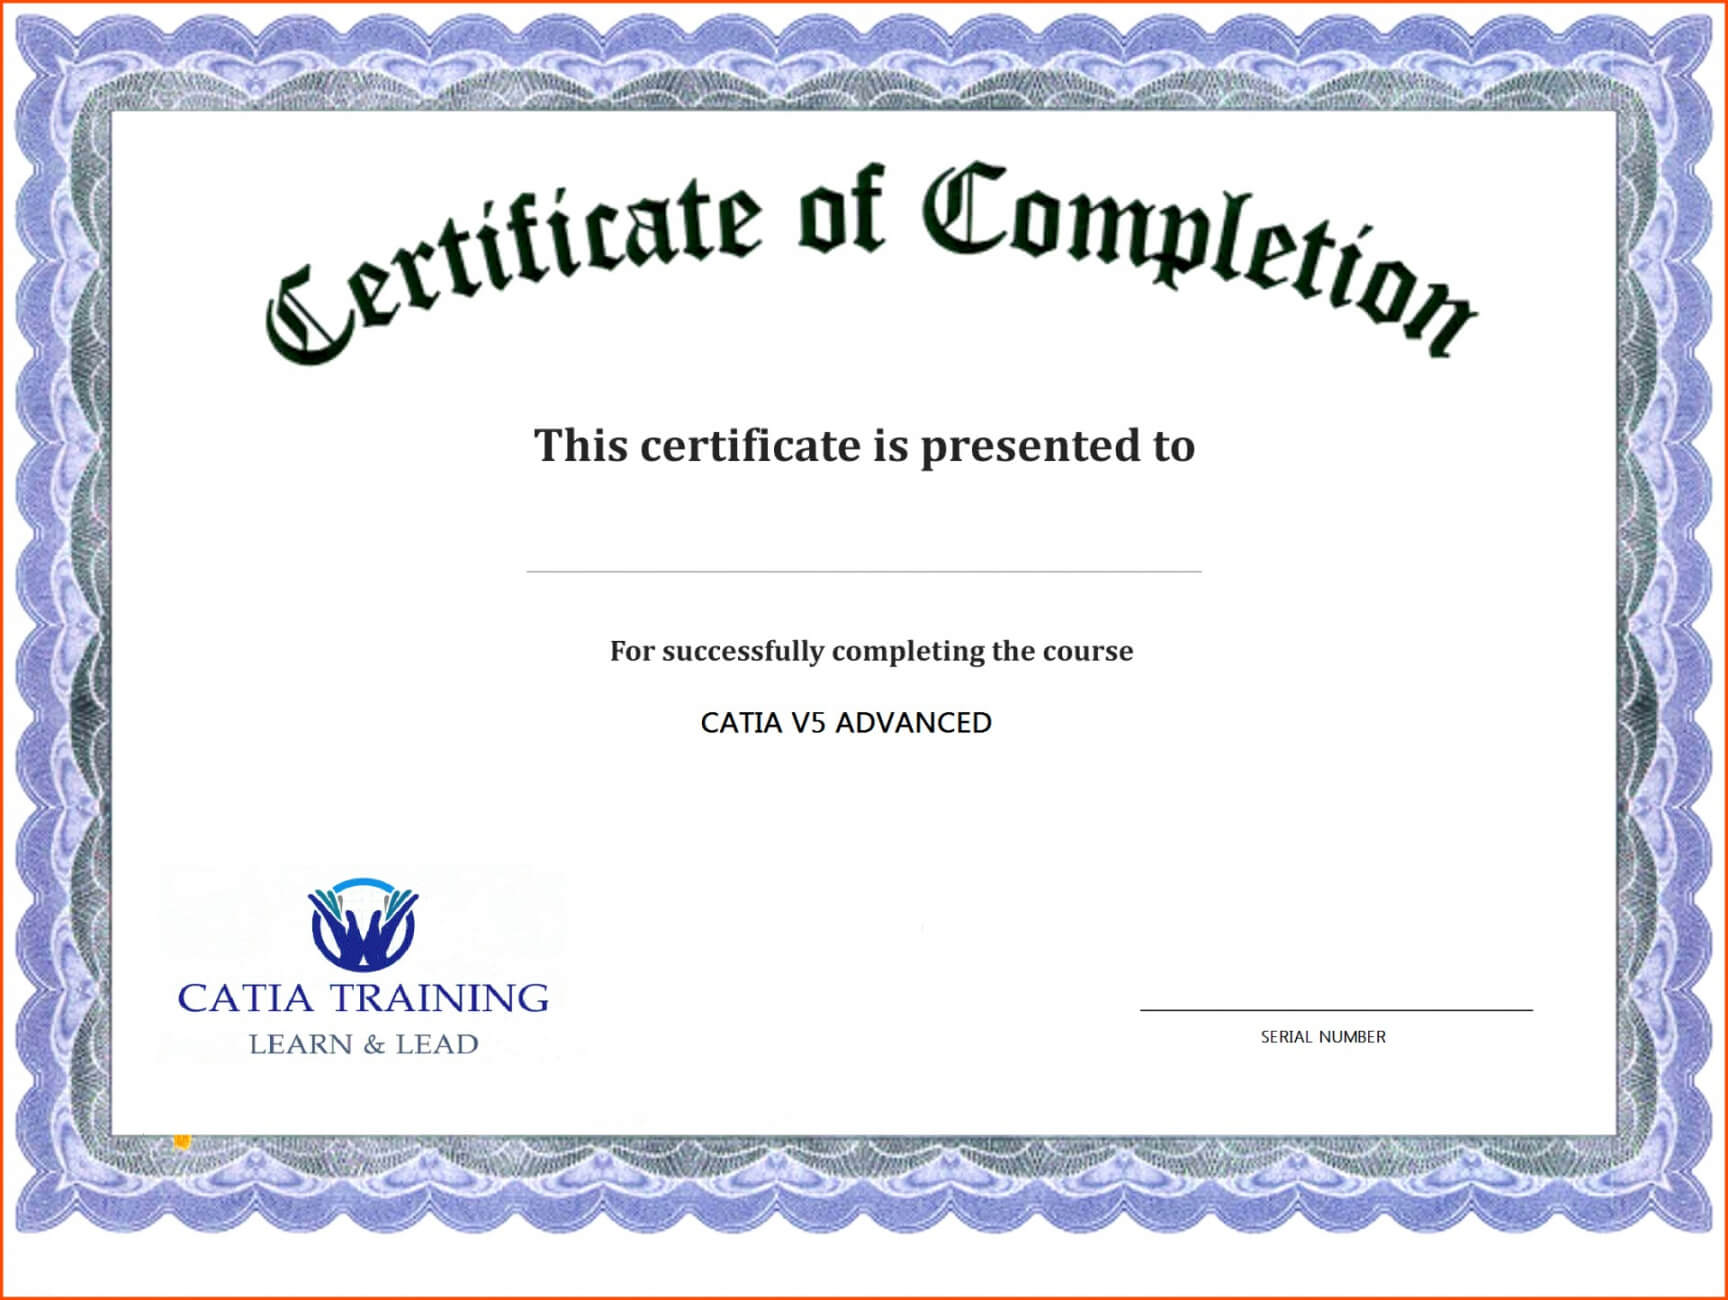 Safety Training Certificate Template Free With Jct Practical Completion Certificate Template